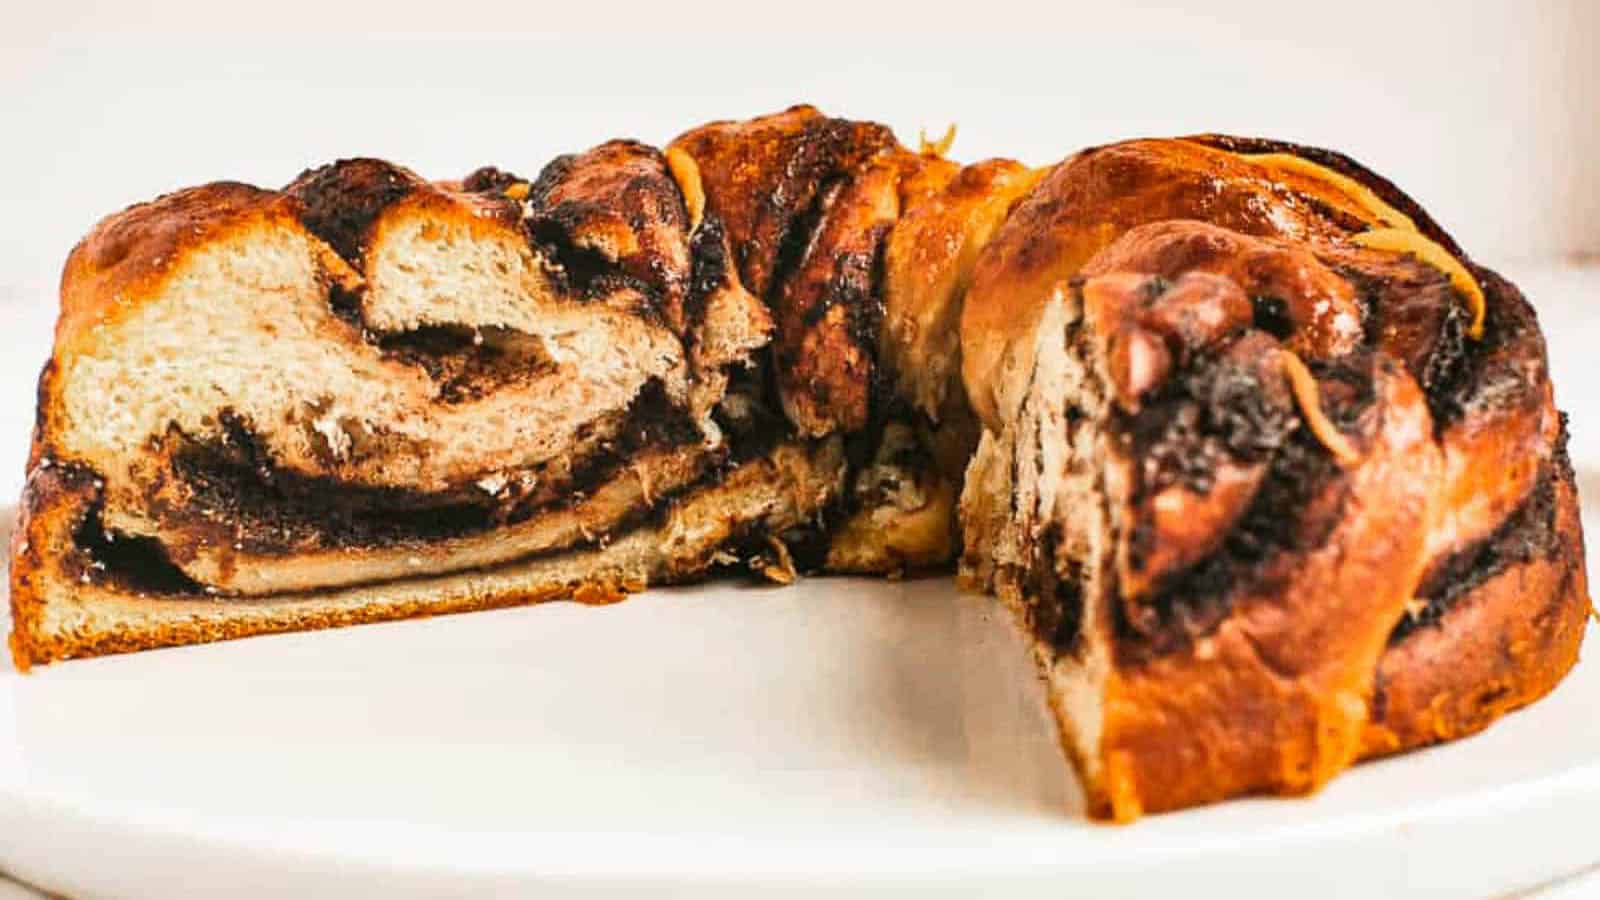 Low angle shot of a chocolate babka with a wedge removed so you can see the inside.